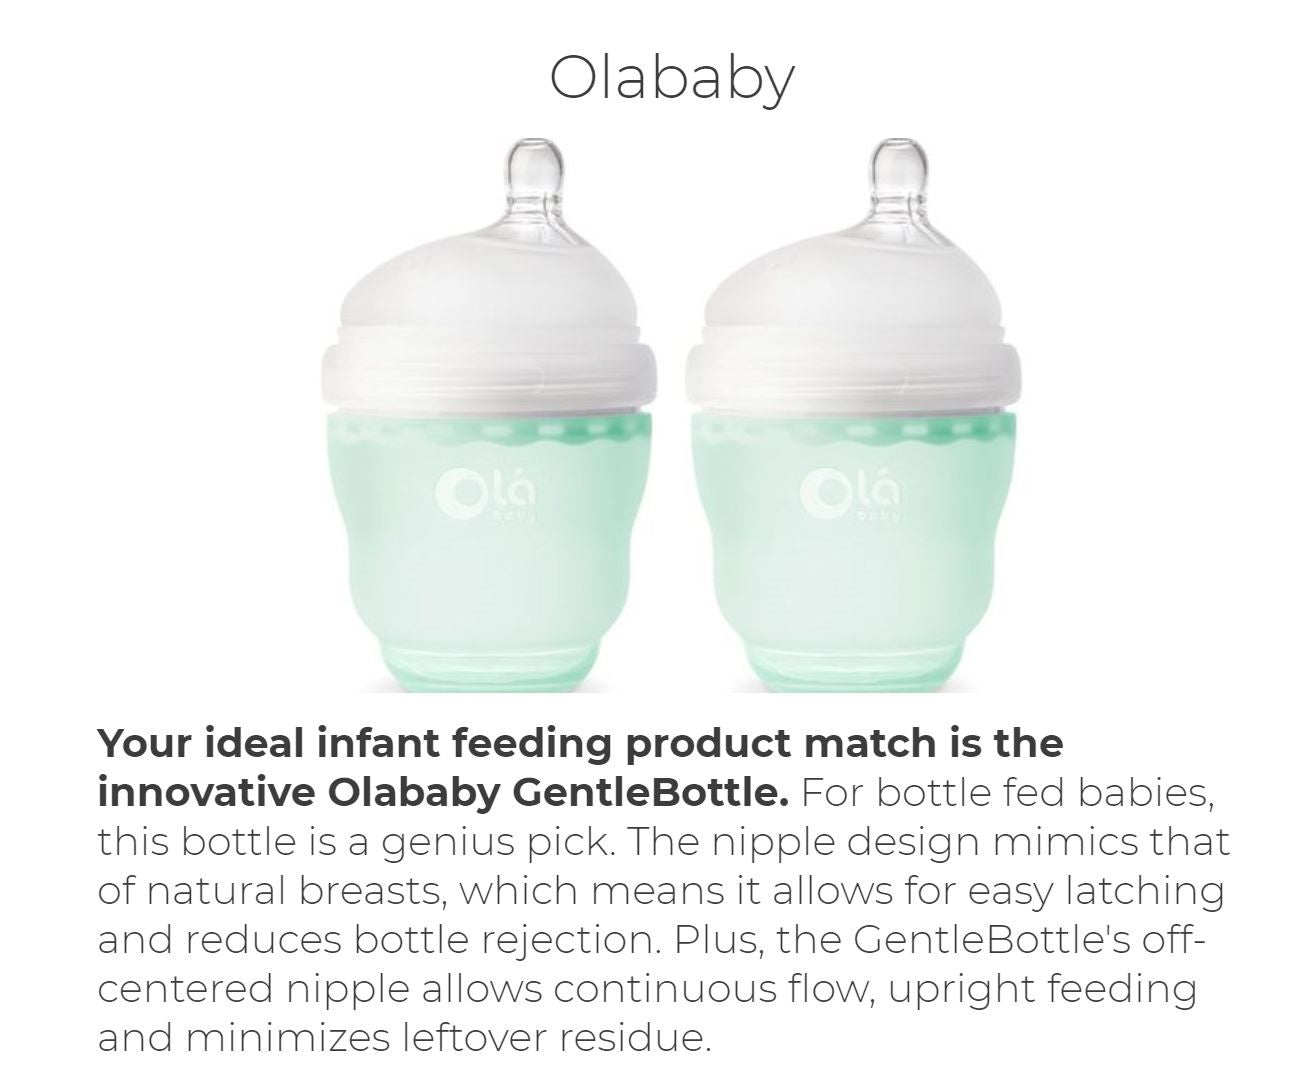 QUIZ: What’s Your Ideal Infant Feeding Product Match? by GuguGuru